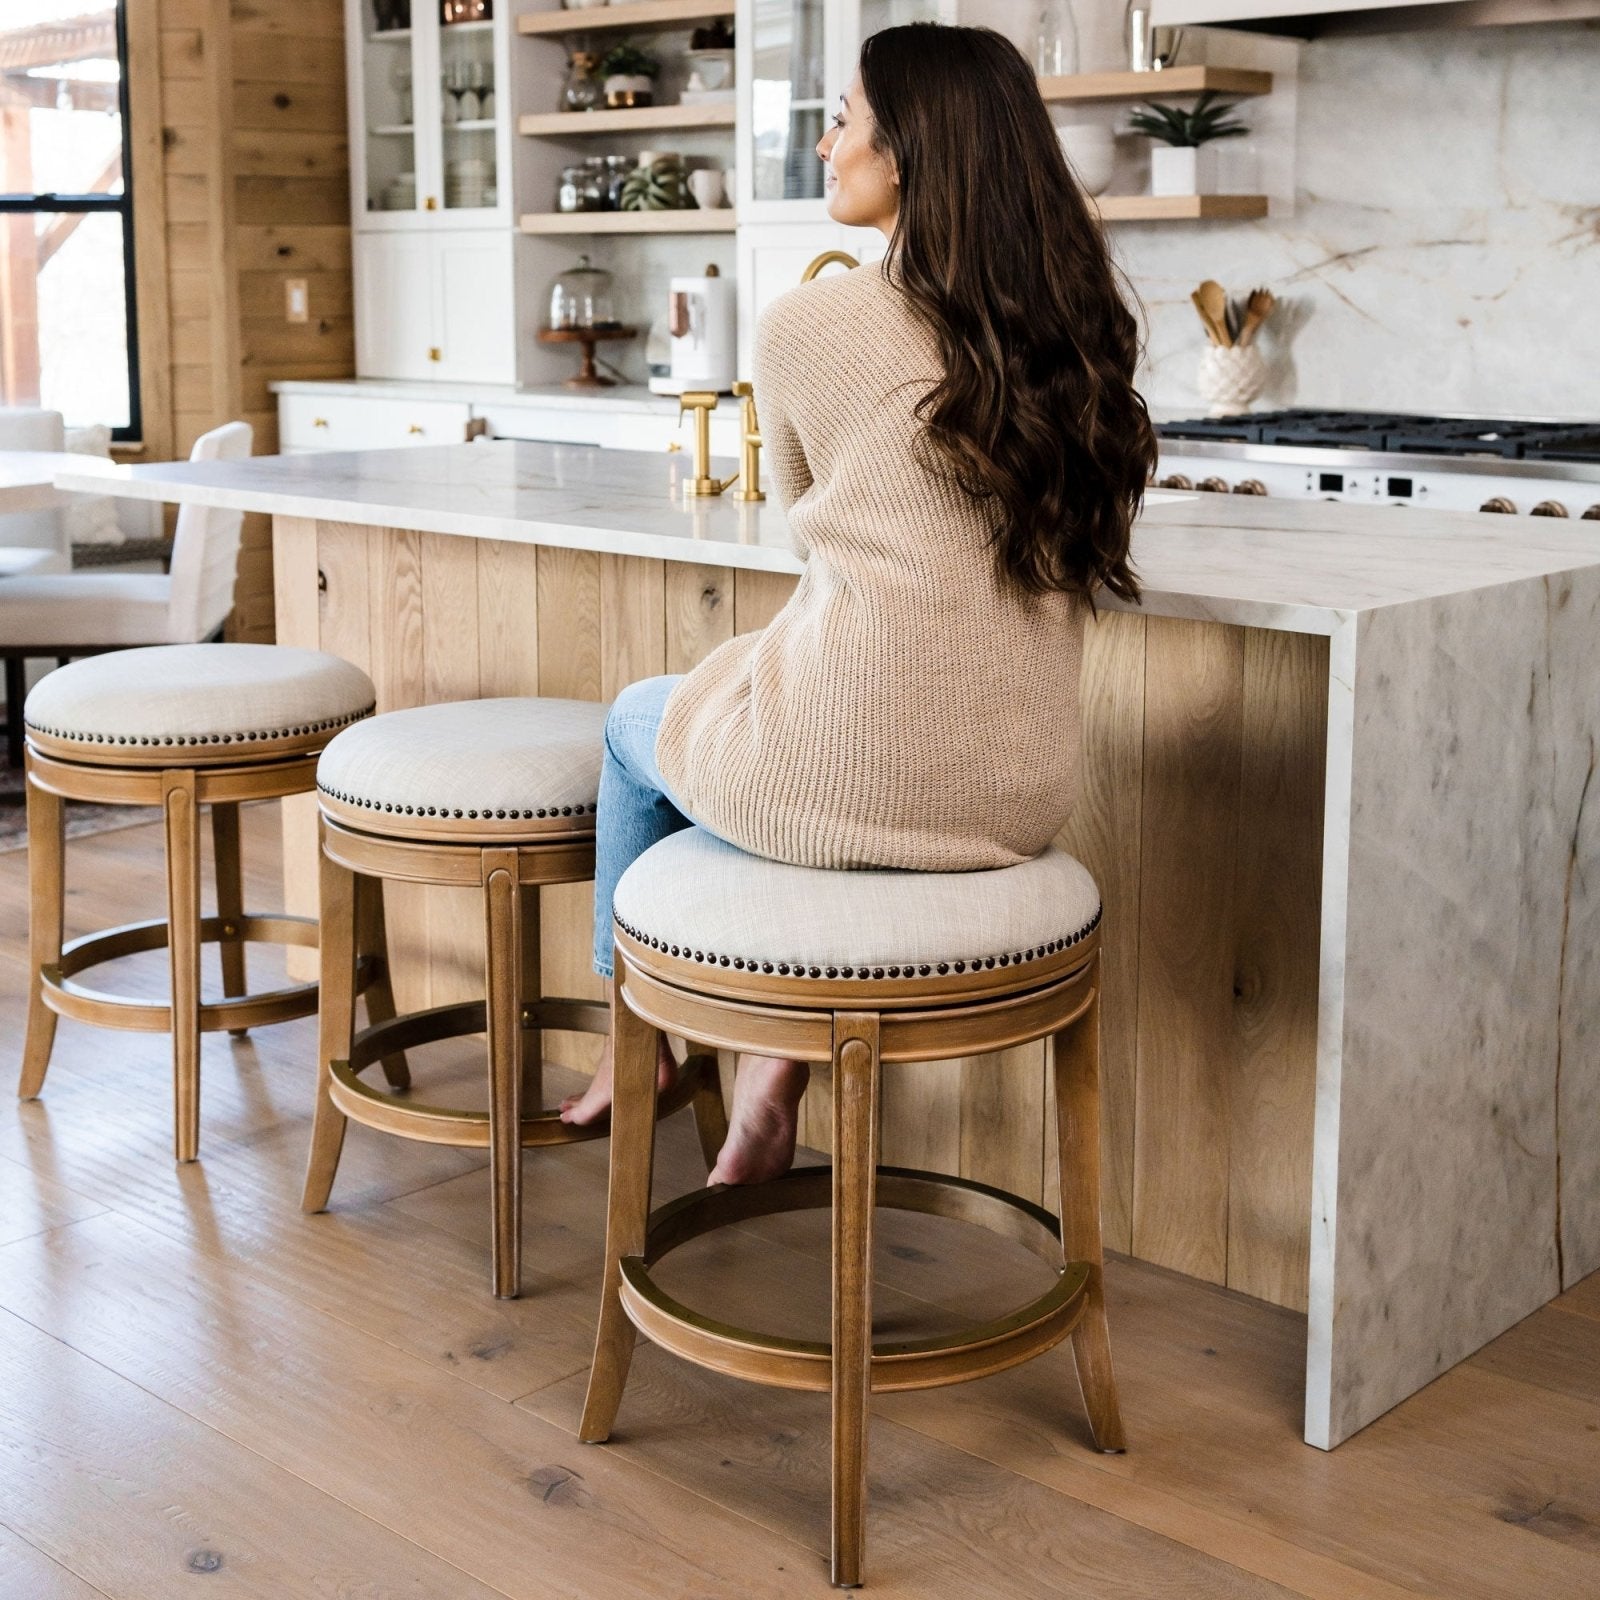 Alexander Backless Bar Stool in Weathered Oak Finish with Sand Color Fabric Upholstery in Stools by Maven Lane